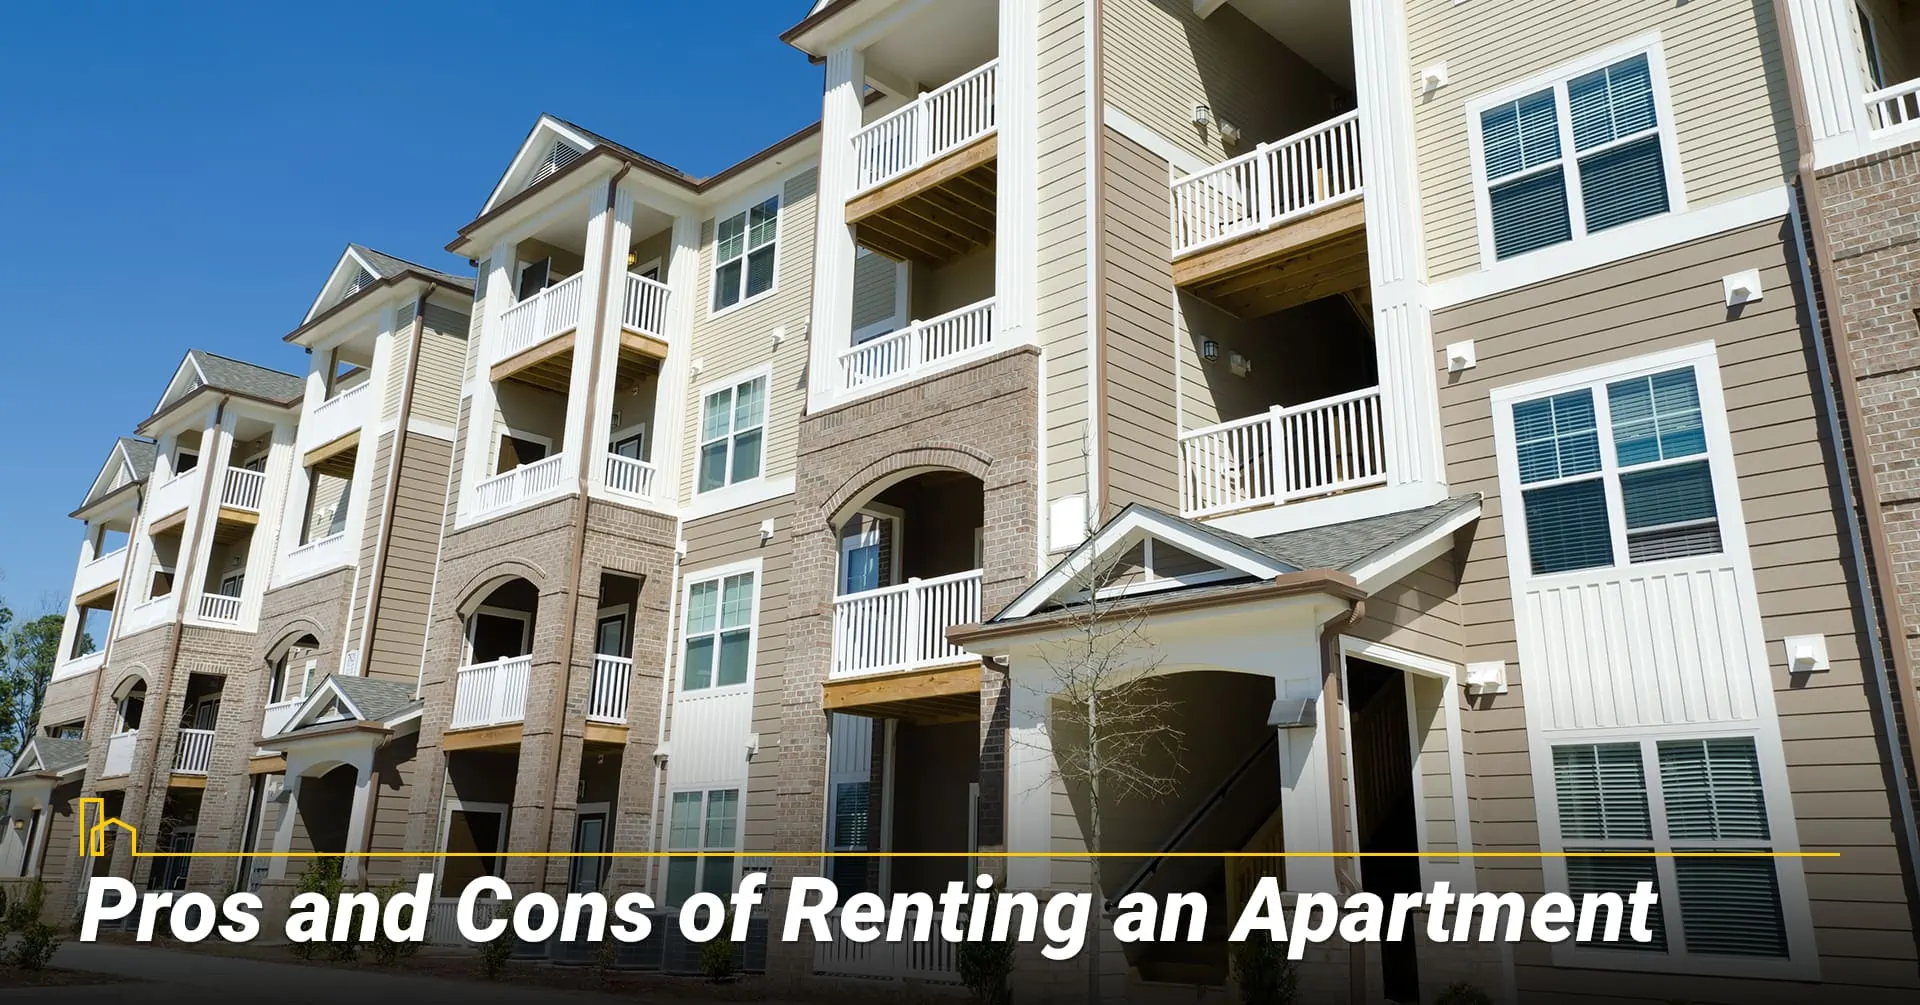 PROS AND CONS OF RENTING AN APARTMENT